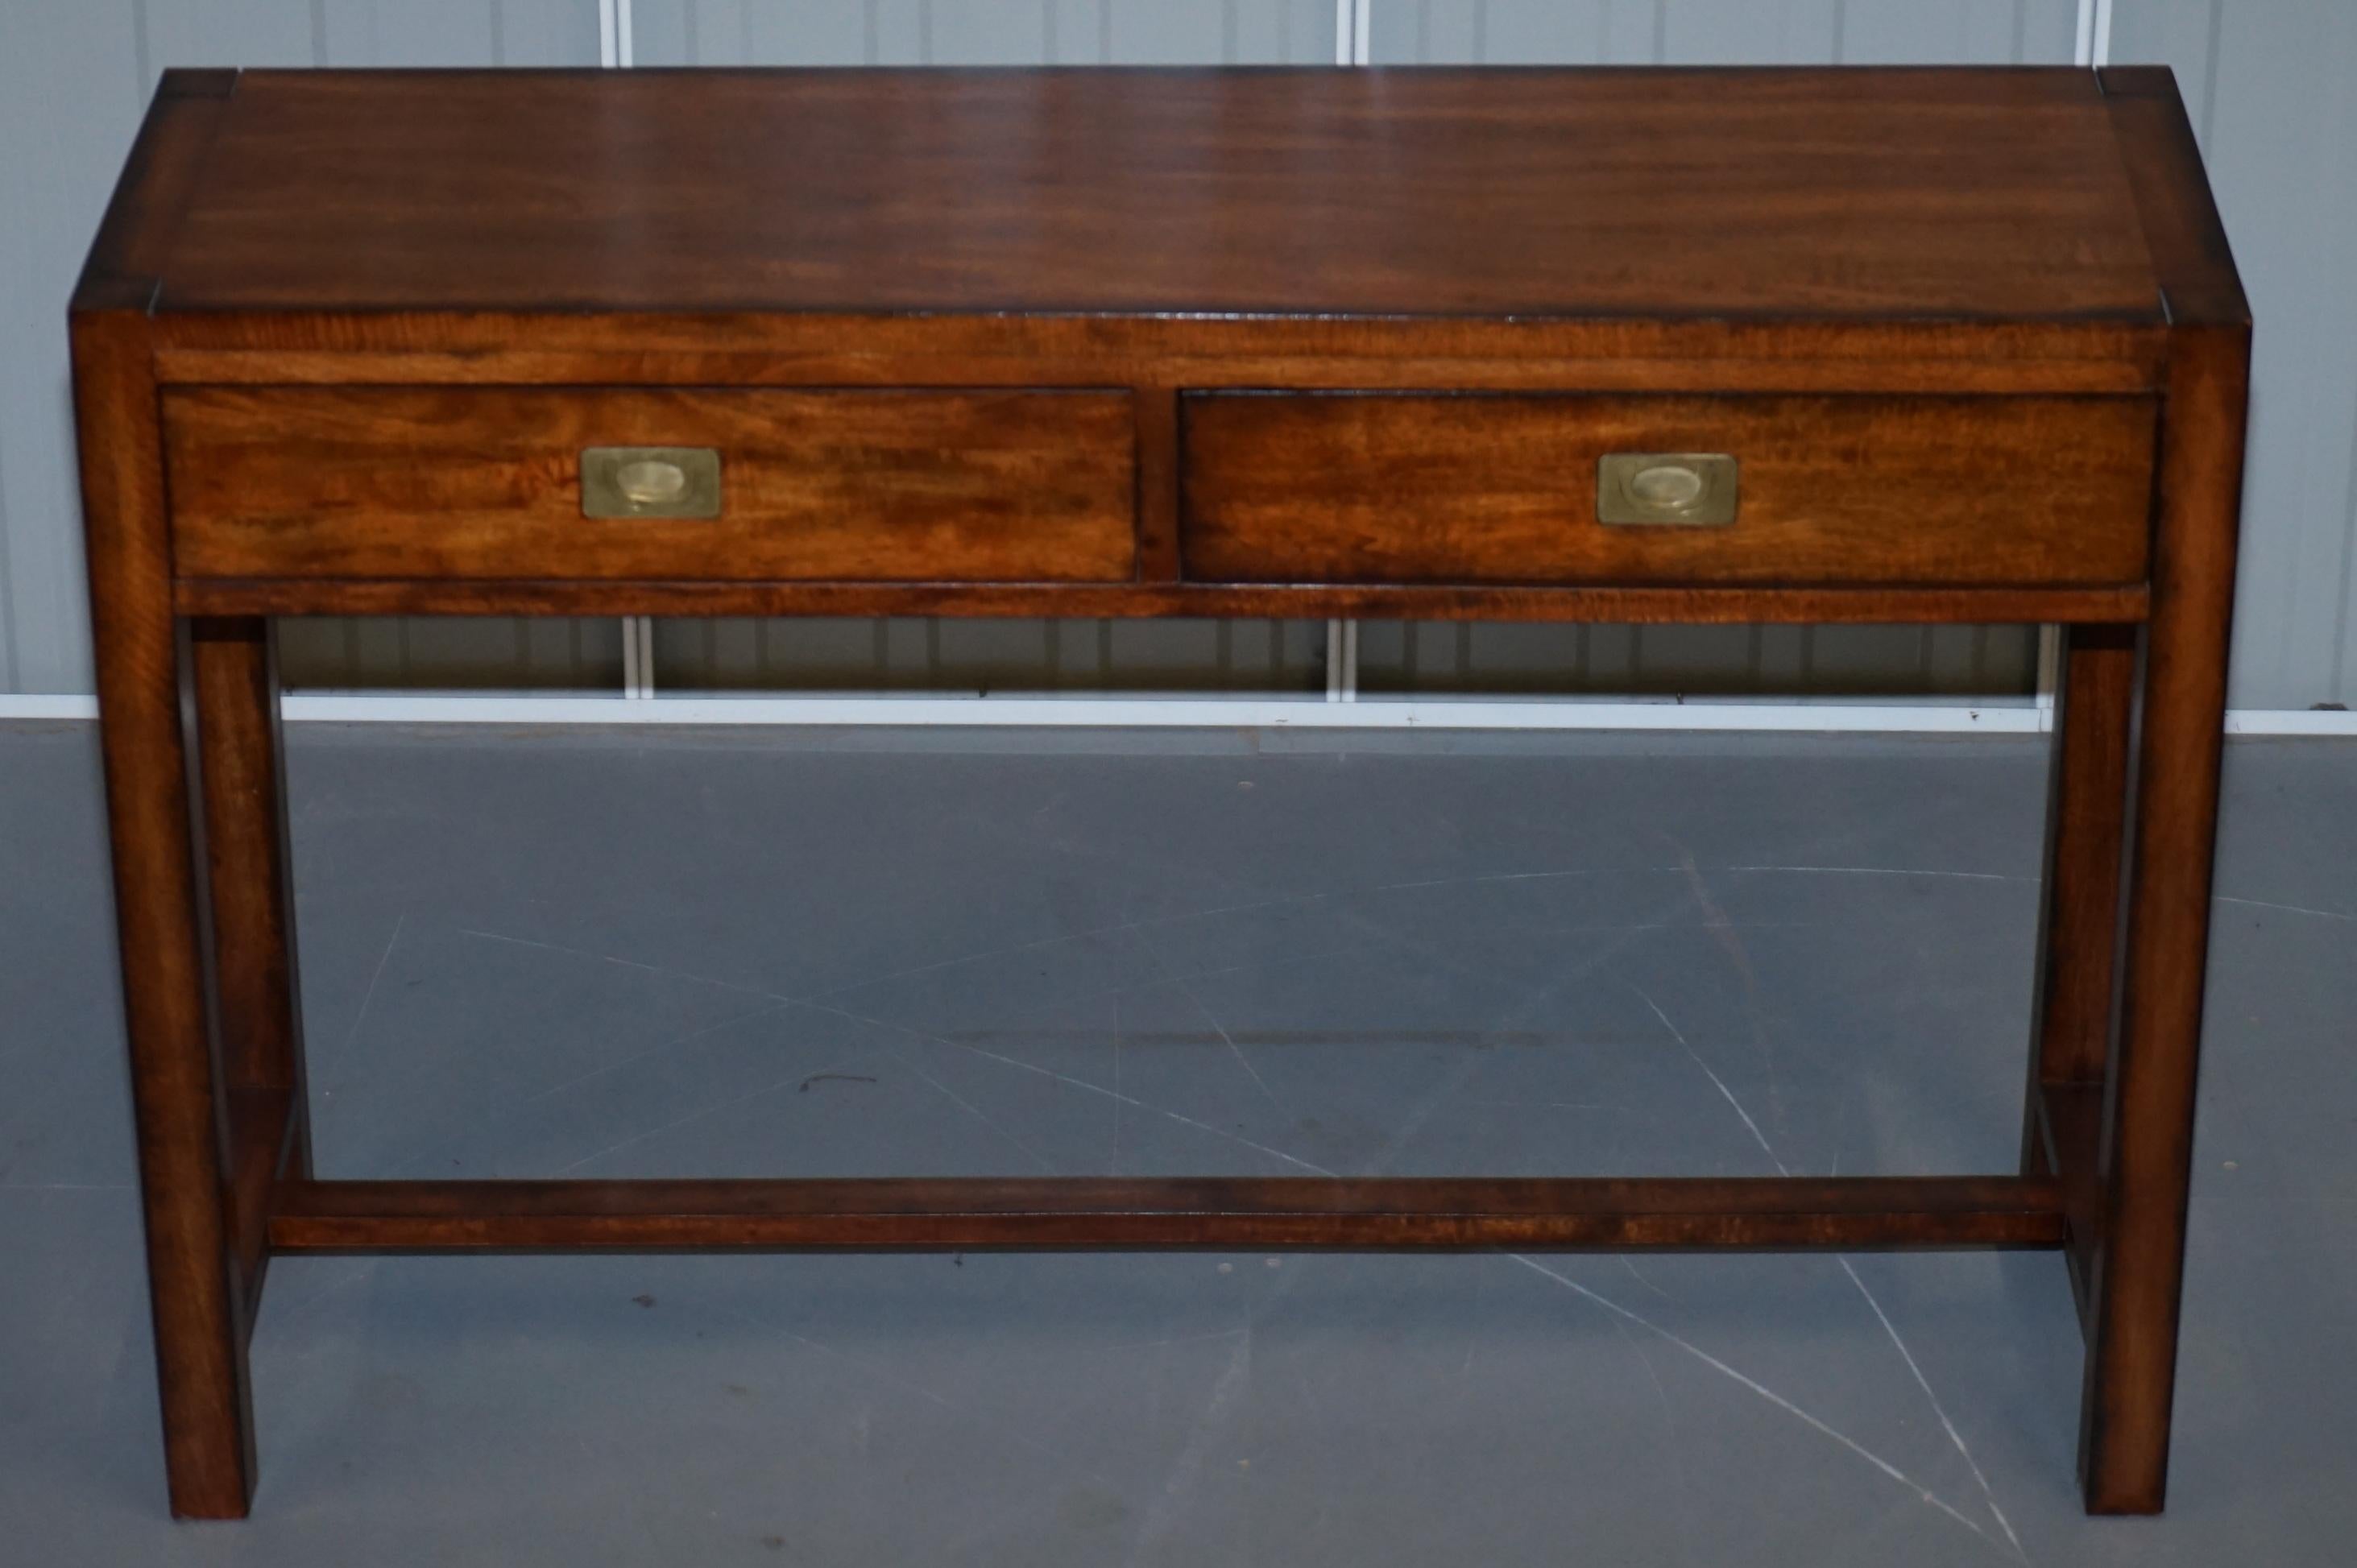 We are delighted to offer for sale this lovely vintage Military Campaign style console table with single drawer

Made from solid mahogany and with bronzed metal hardware.

We have cleaned waxed and polished it, there will be the odd patina mark